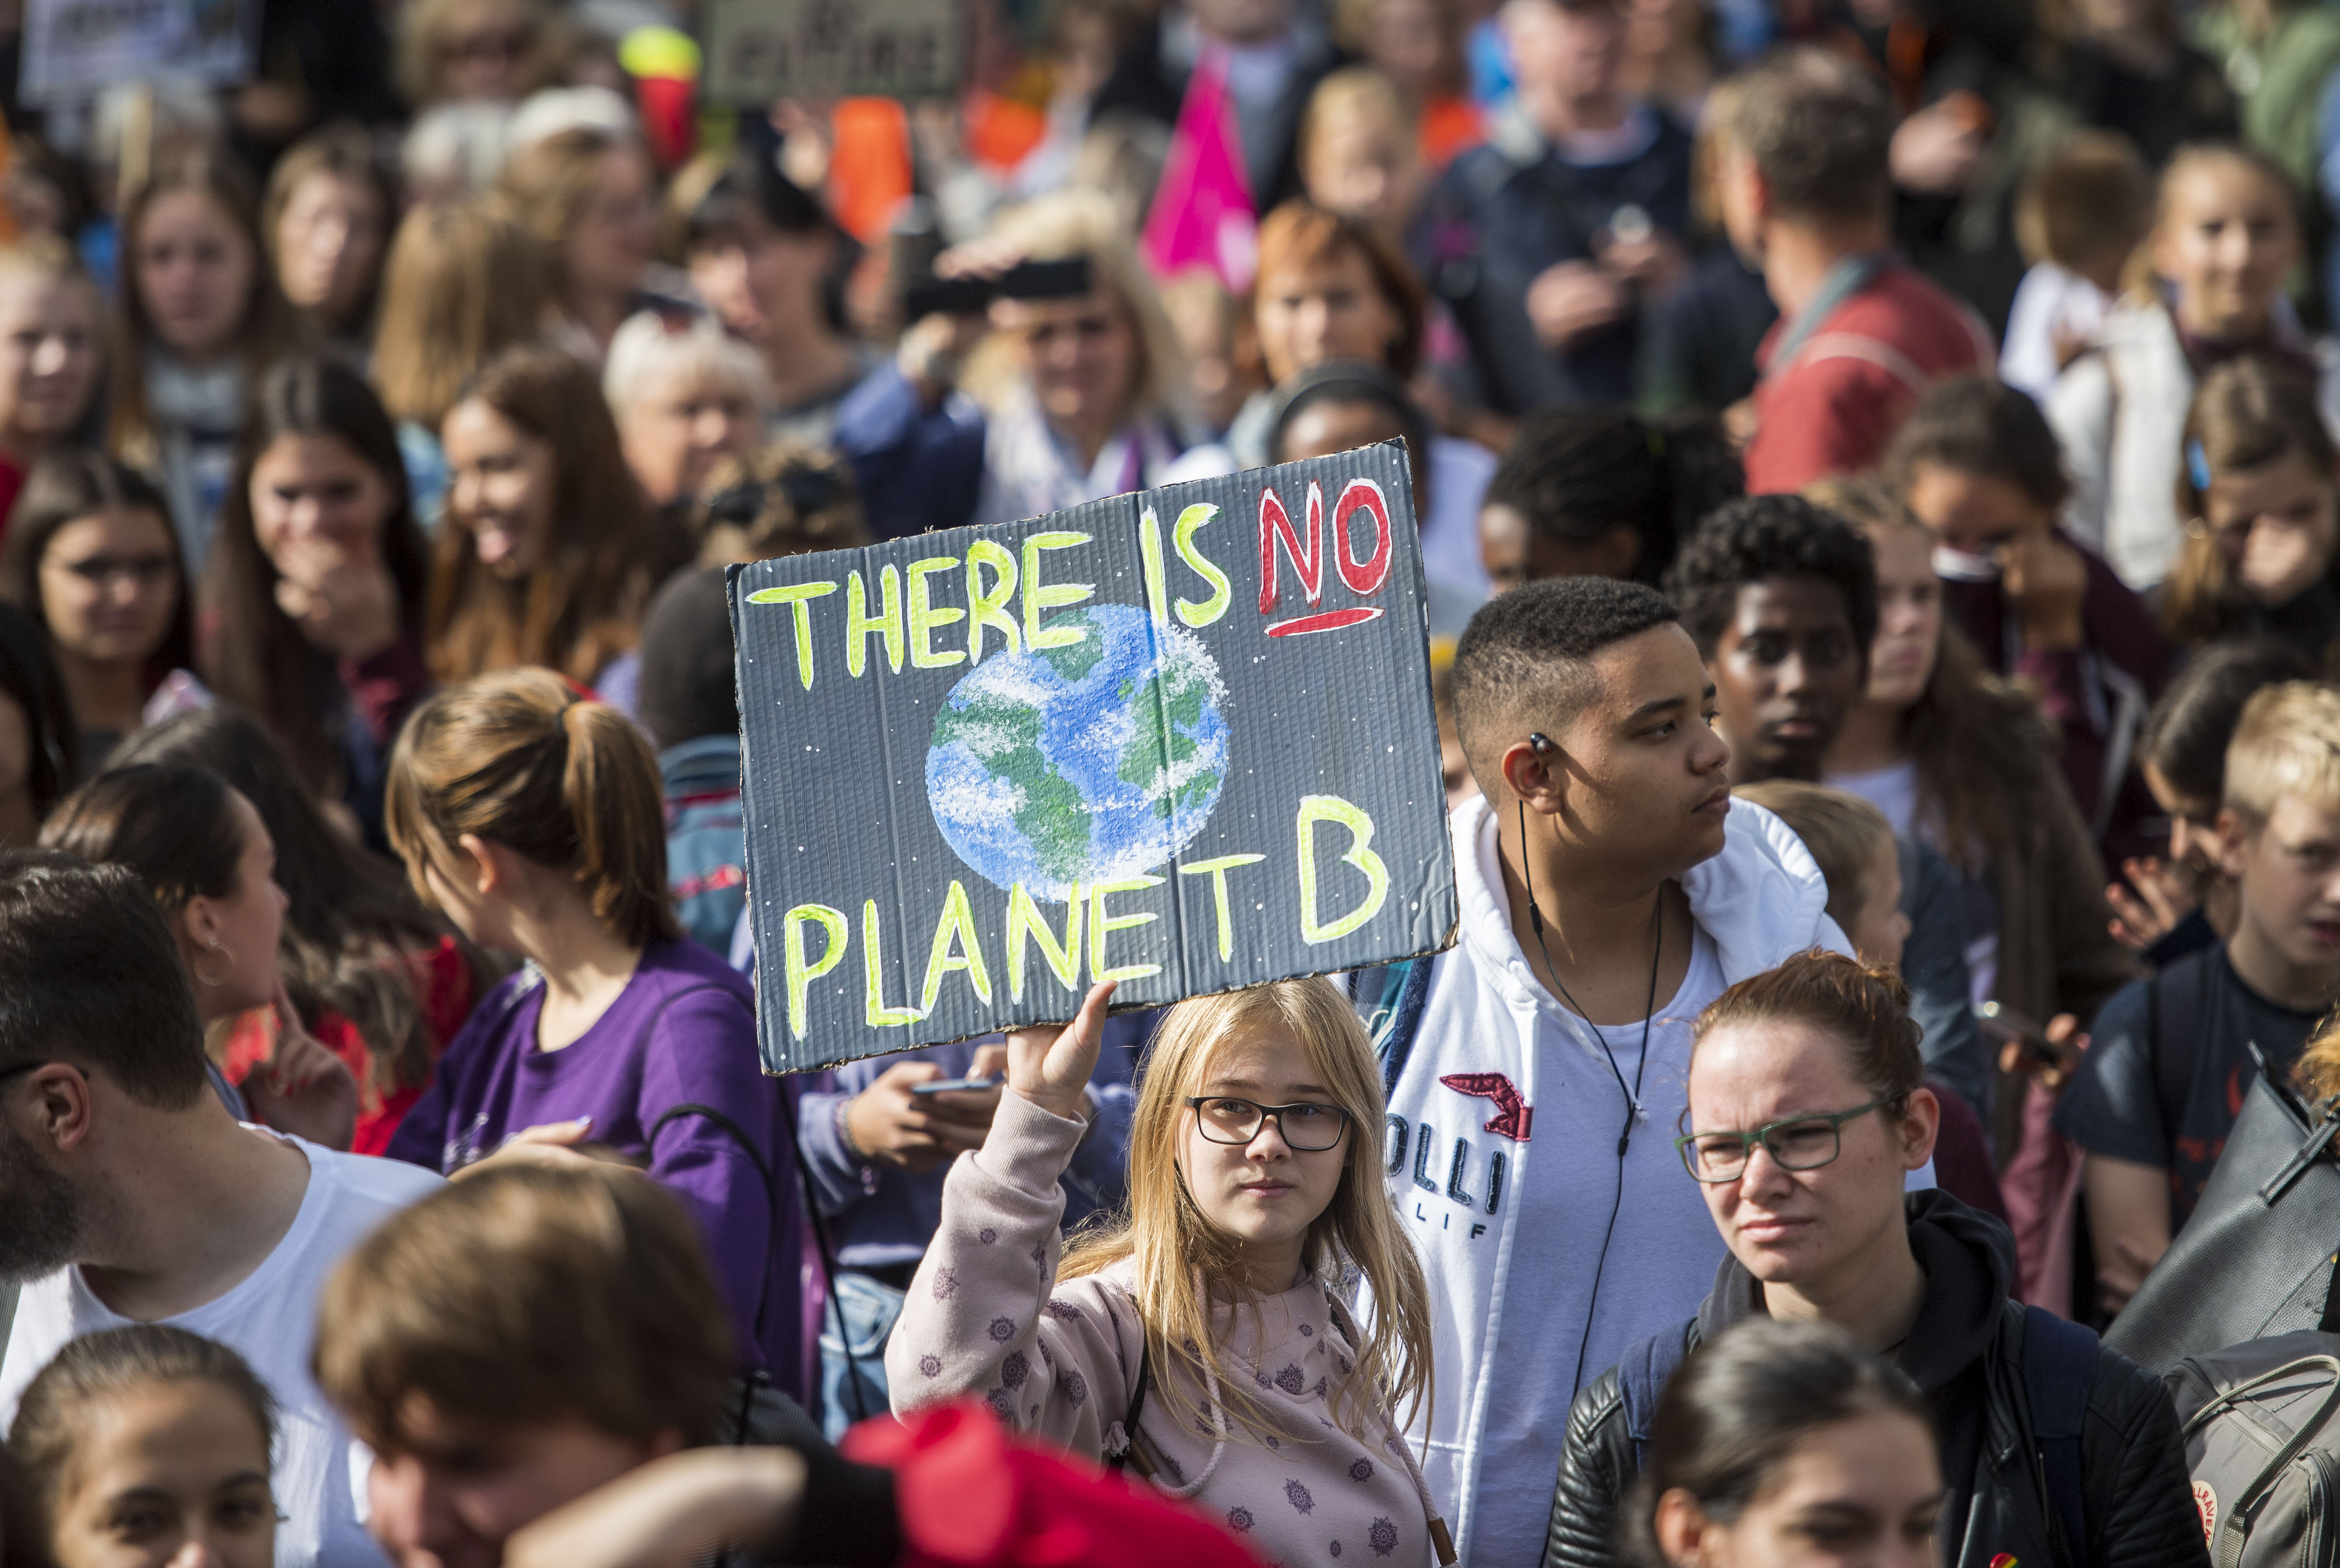 Participants in the Fridays For Future movement protest during a nationwide climate change action day in Frankfurt, Germany. Fridays for Future protests and strikes are registered today in over 400 cities across Germany.